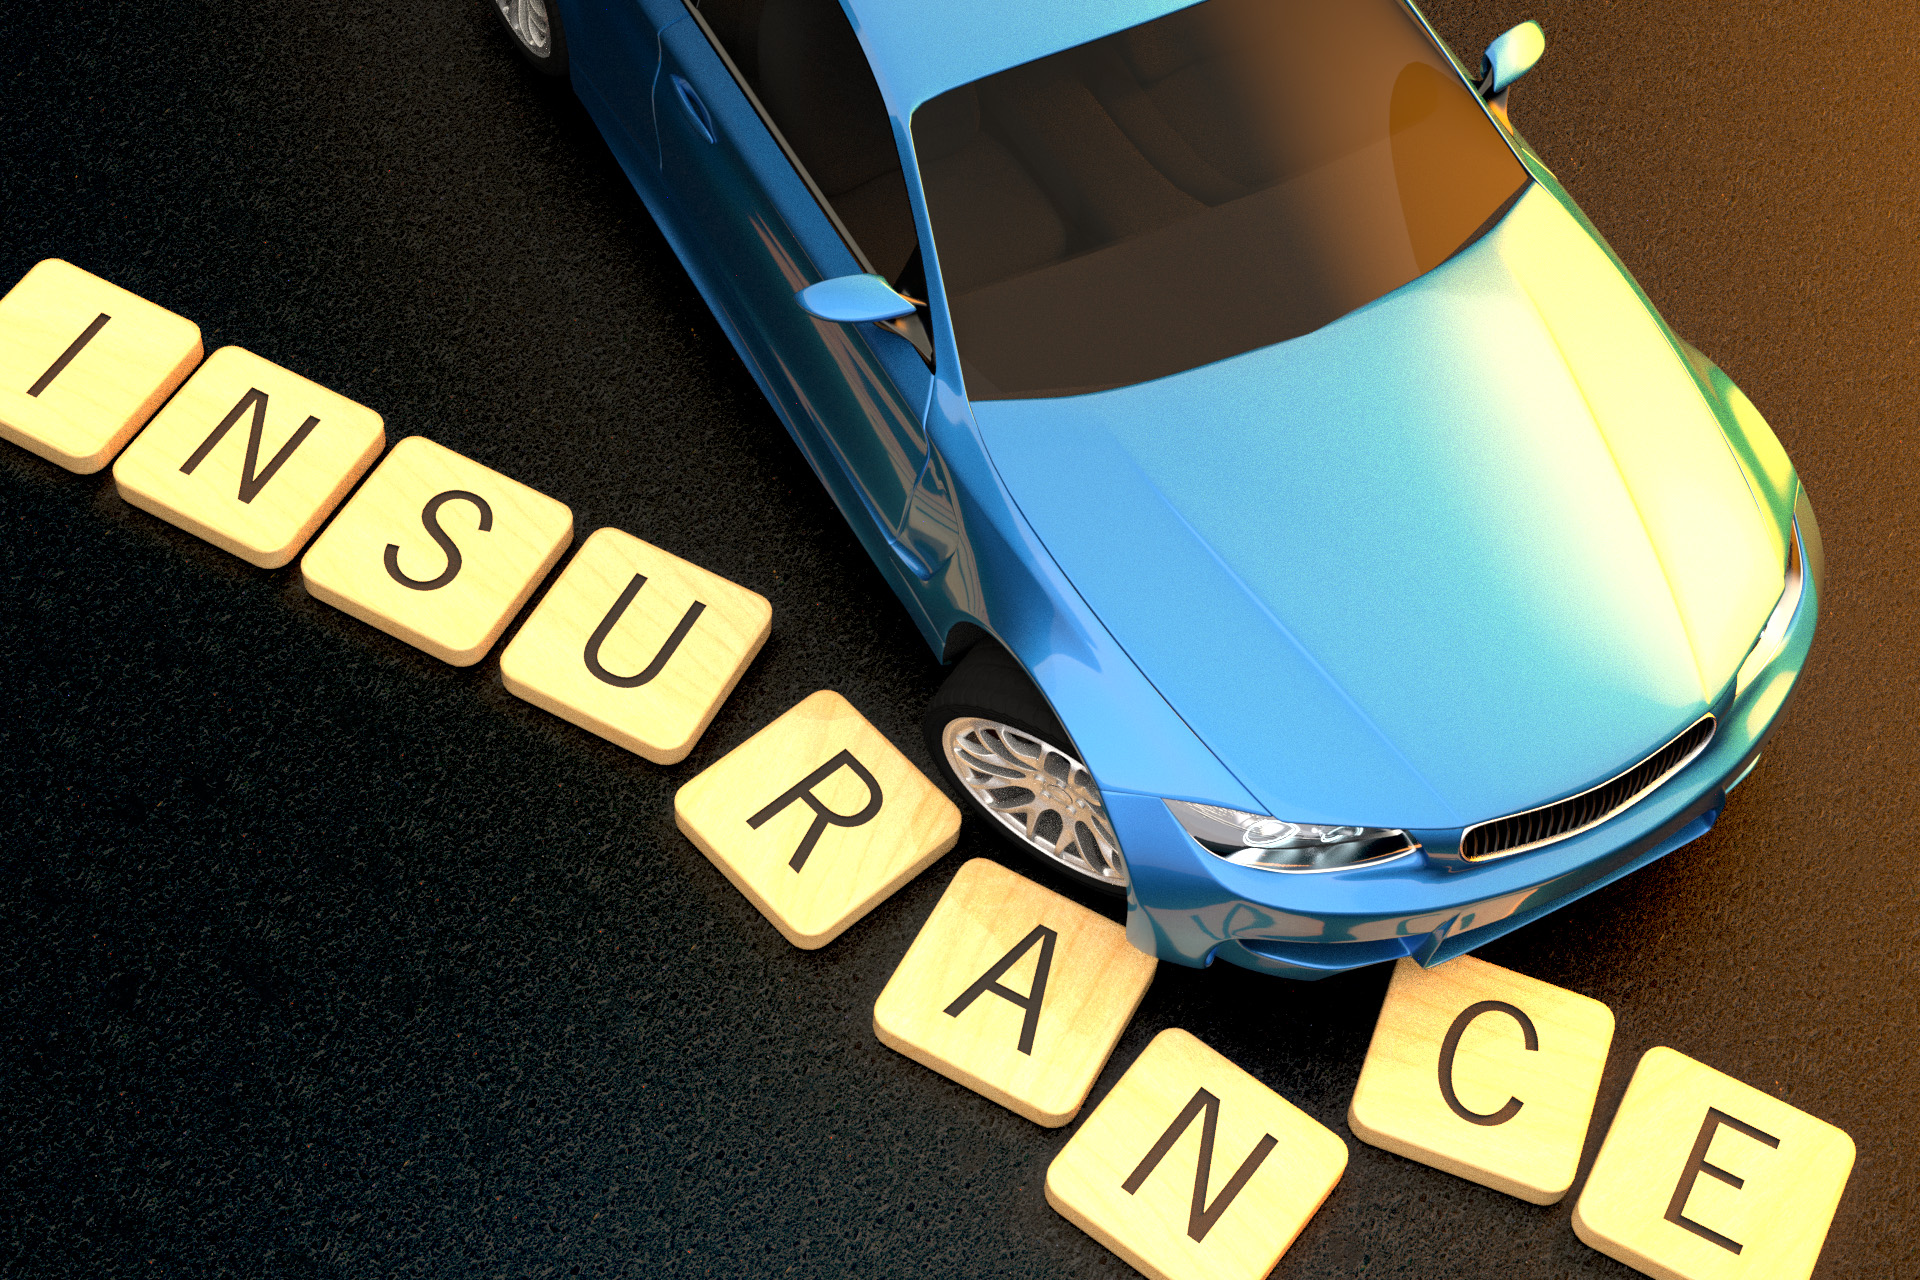 Car accident insurance concept free image download